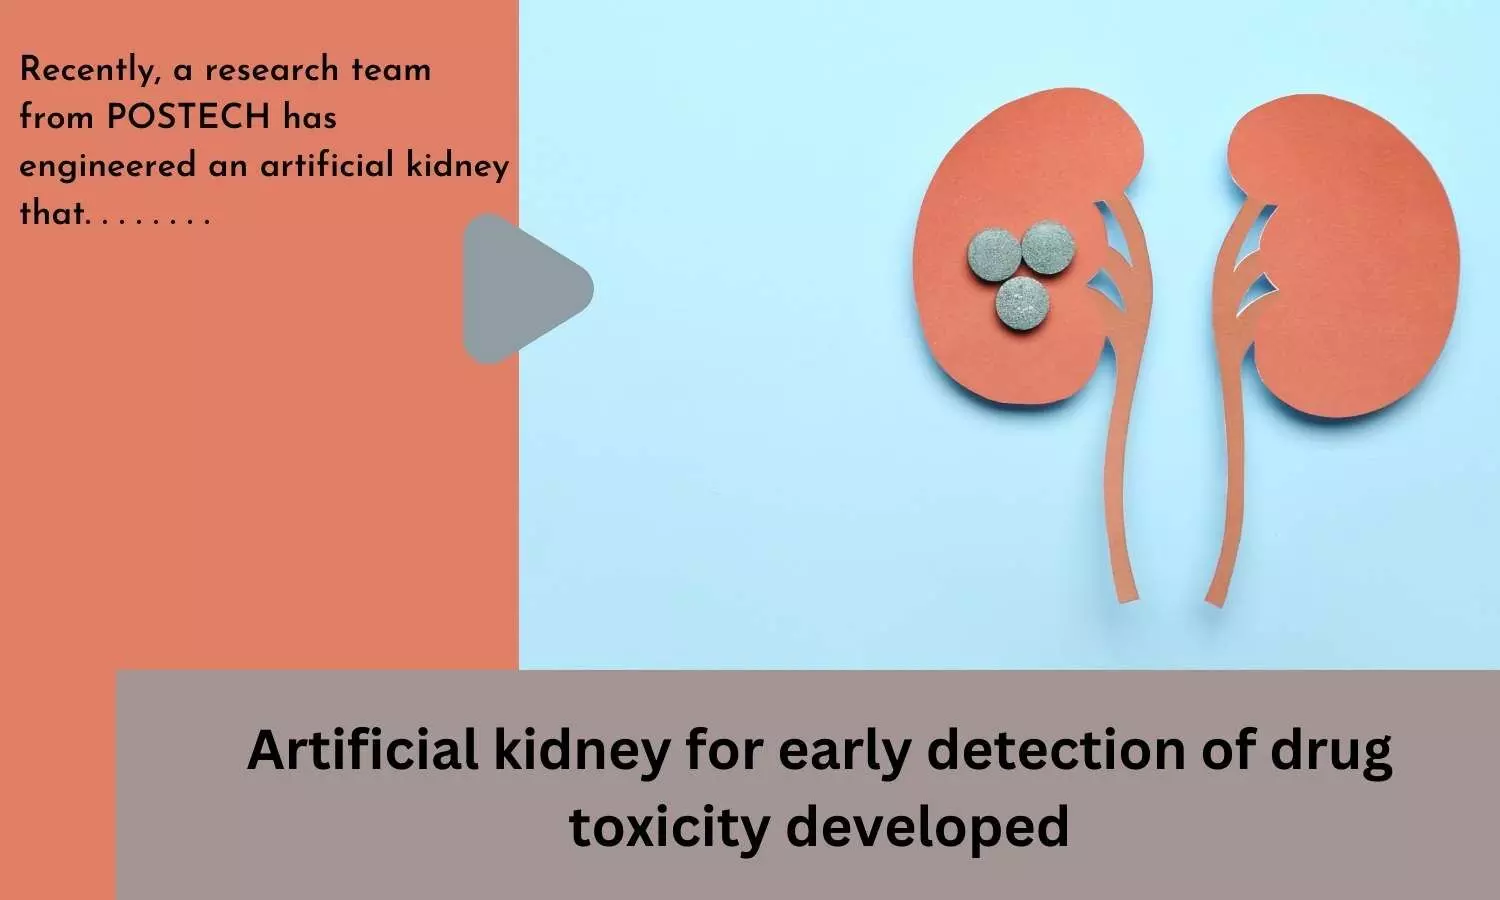 Artificial kidney for early detection of drug toxicity developed